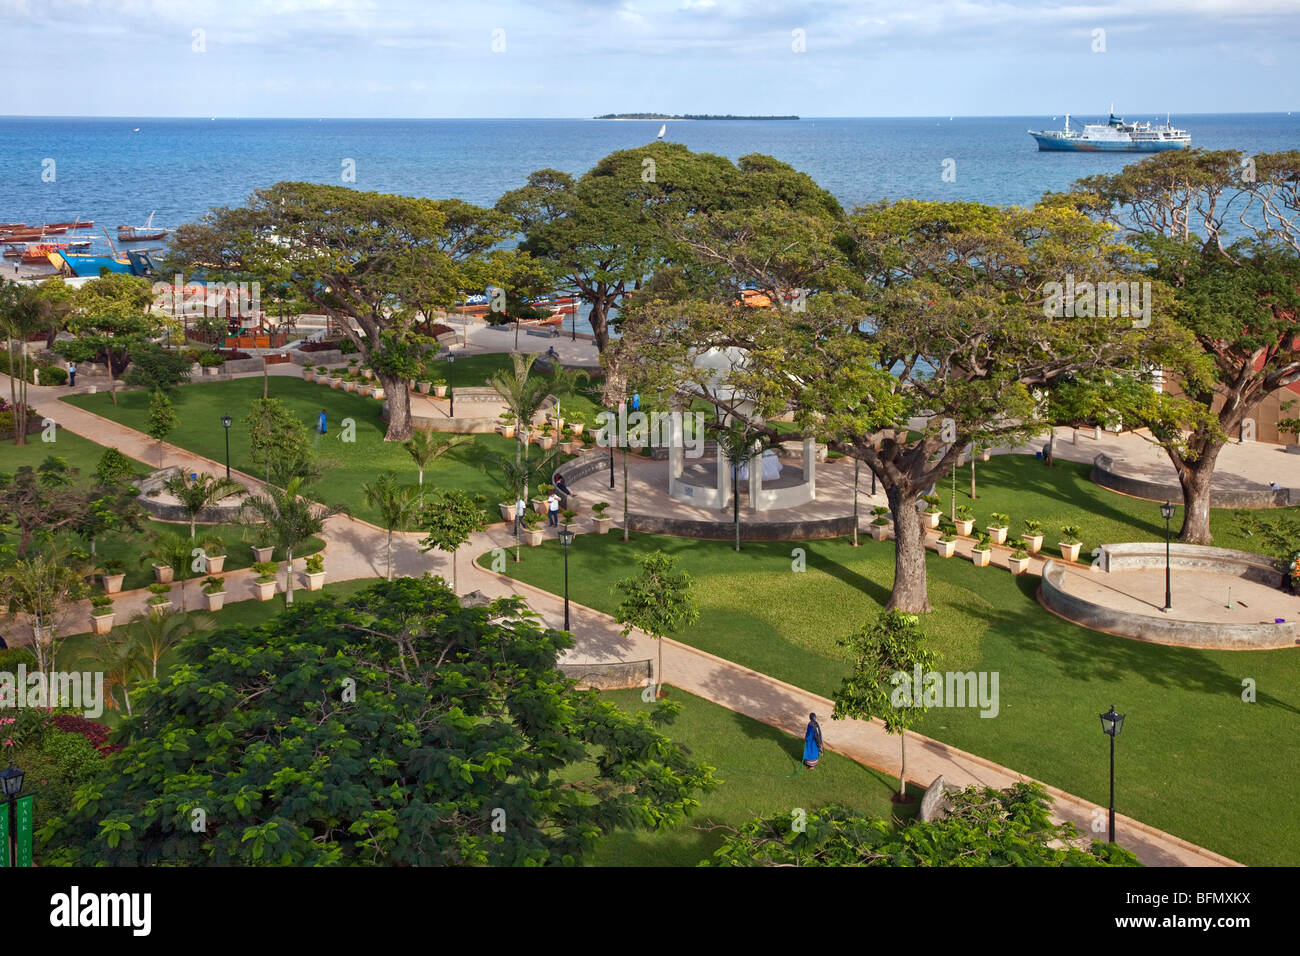 Tanzania, Zanzibar, Stone Town. The attractive Forodhani Gardens grace the seafront in front of Beit al-ajaib, House of Wonders Stock Photo